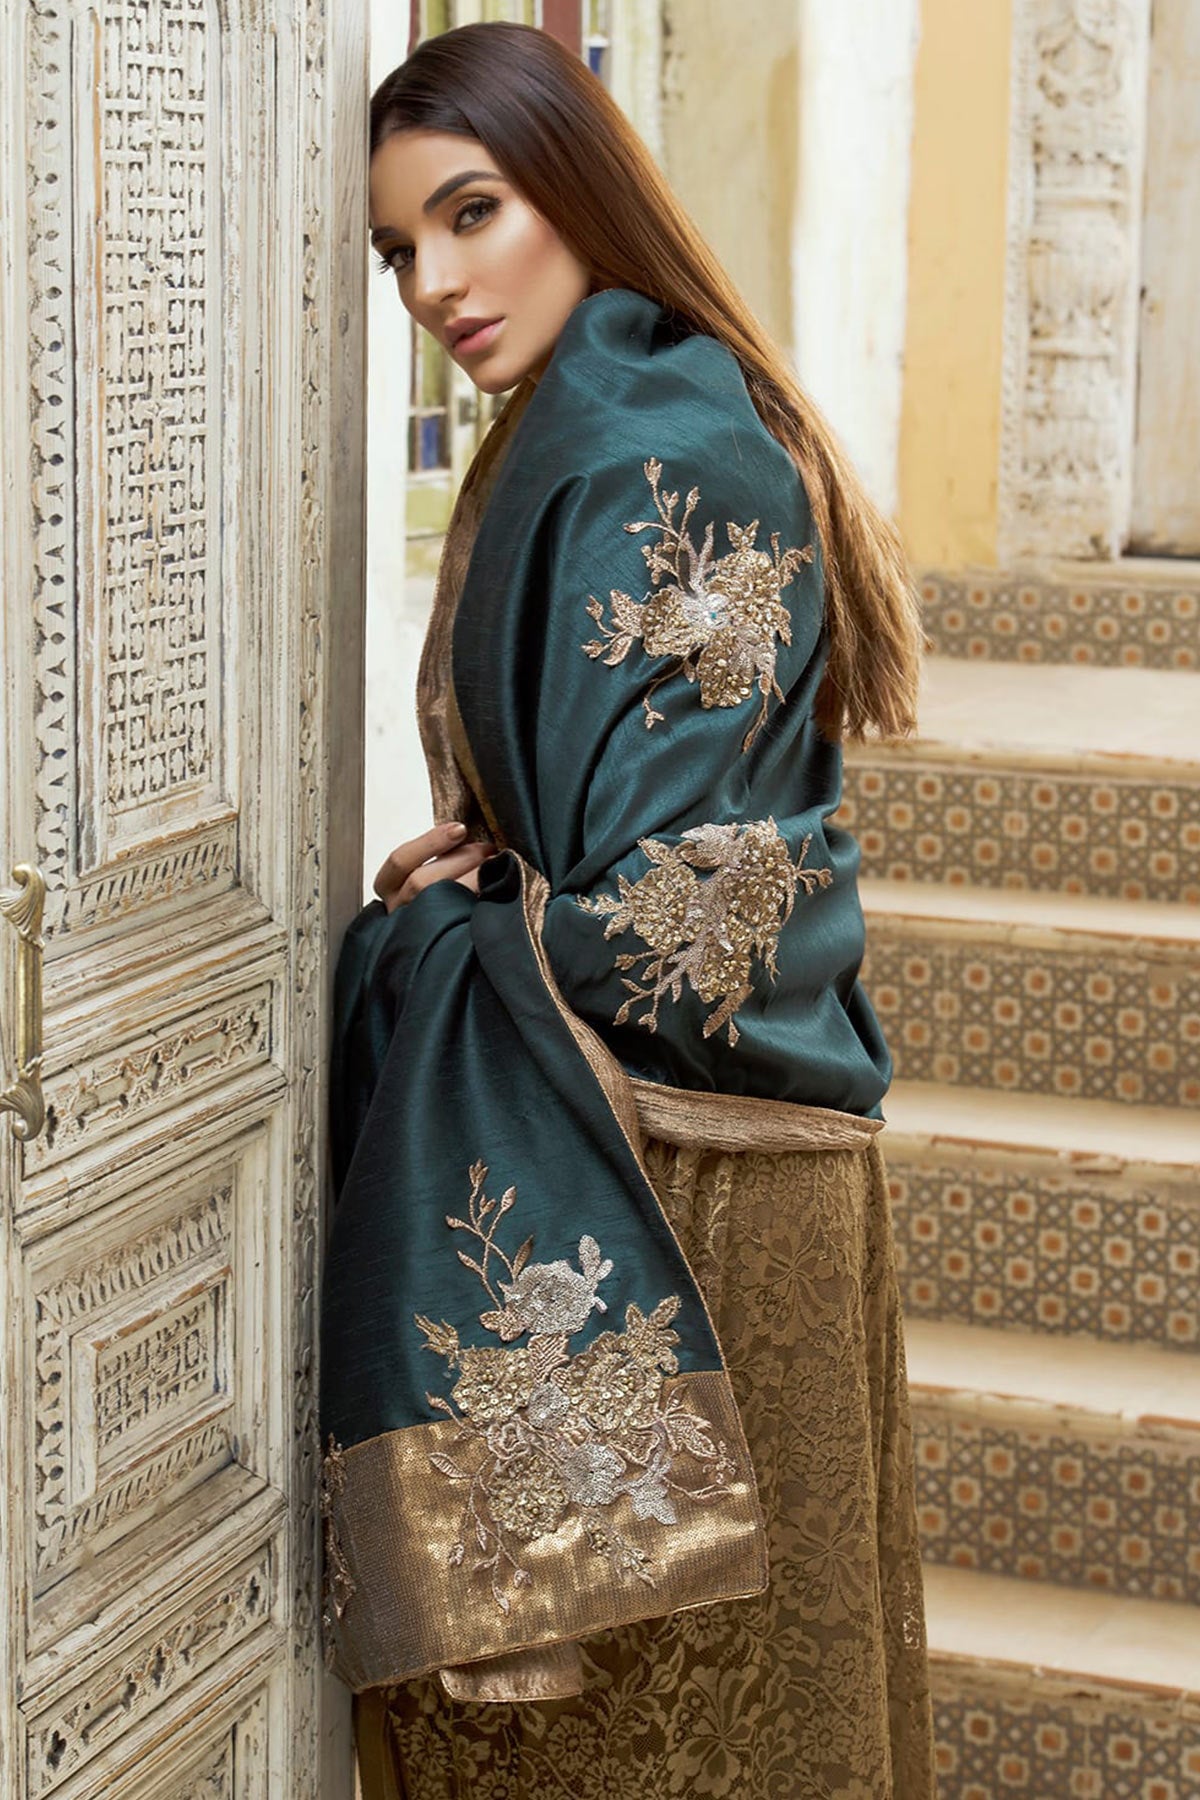 Empress Bouquet ( Shirt and trousers) - Nilofer Shahid